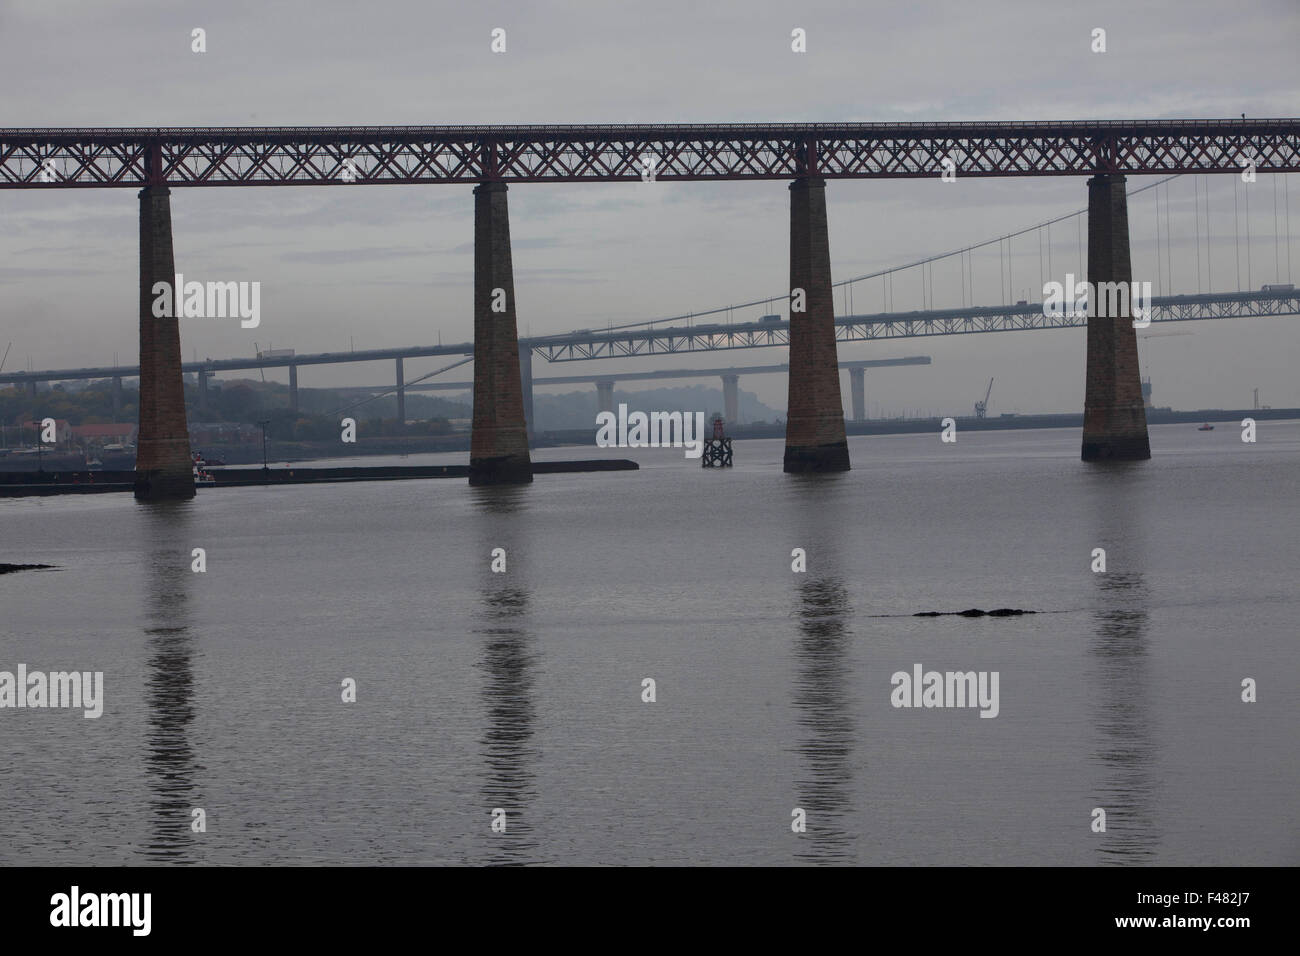 South Queensferry, Scotland.UK. 15th October 2015. Foggy morning in South Queensferry where temperature: 5ºC= 41.00000ºF. Pako Mera/Alamy Live News. Stock Photo